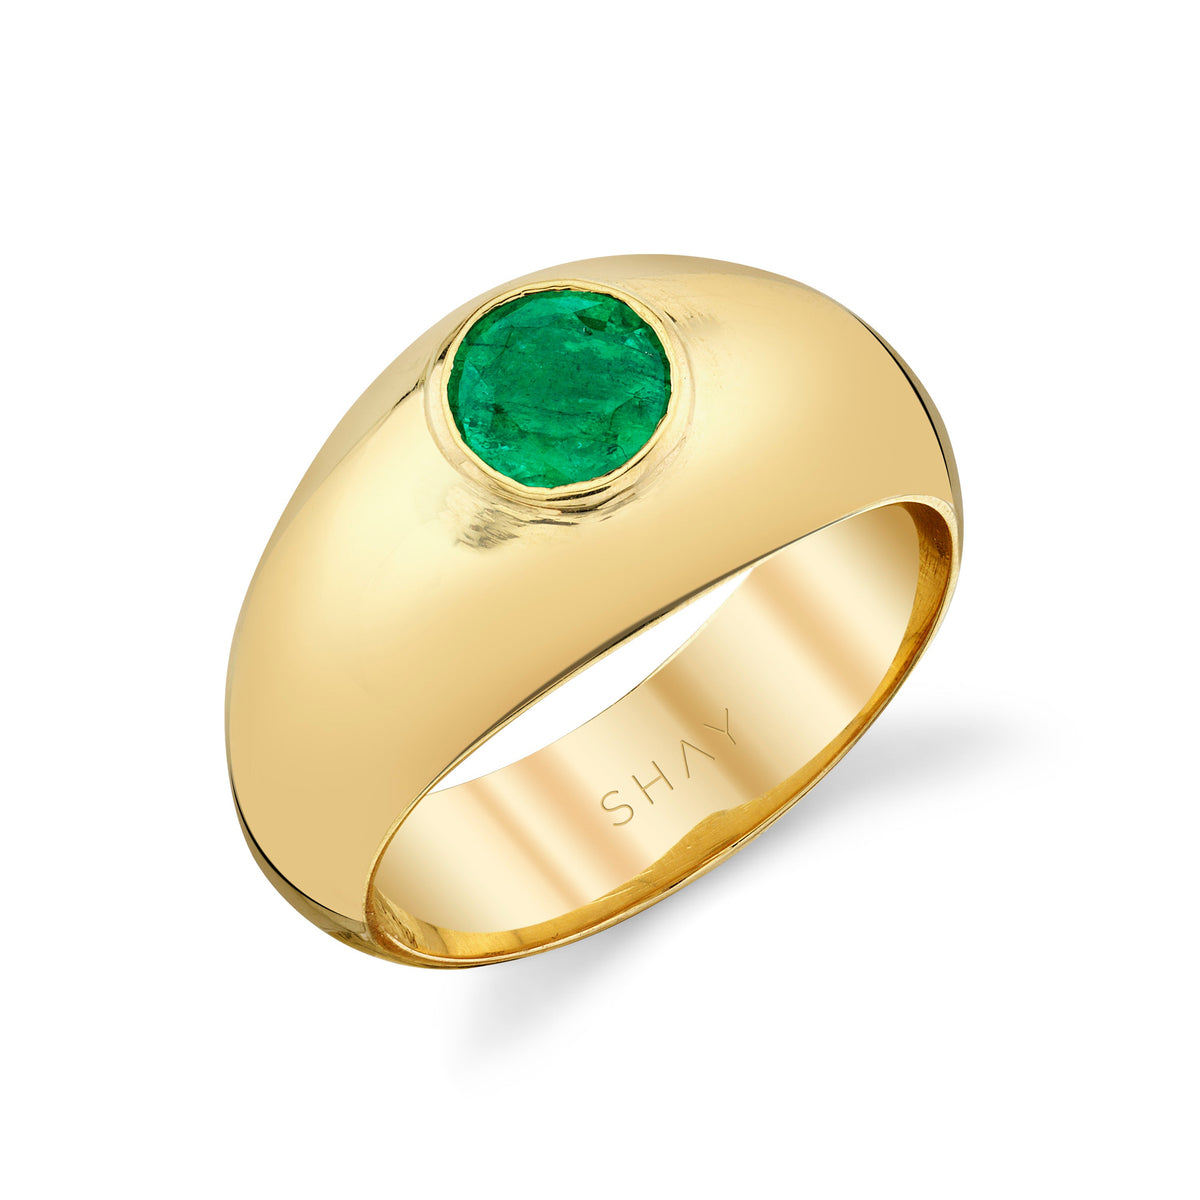 READY TO SHIP SOLID GOLD EMERALD DOME RING